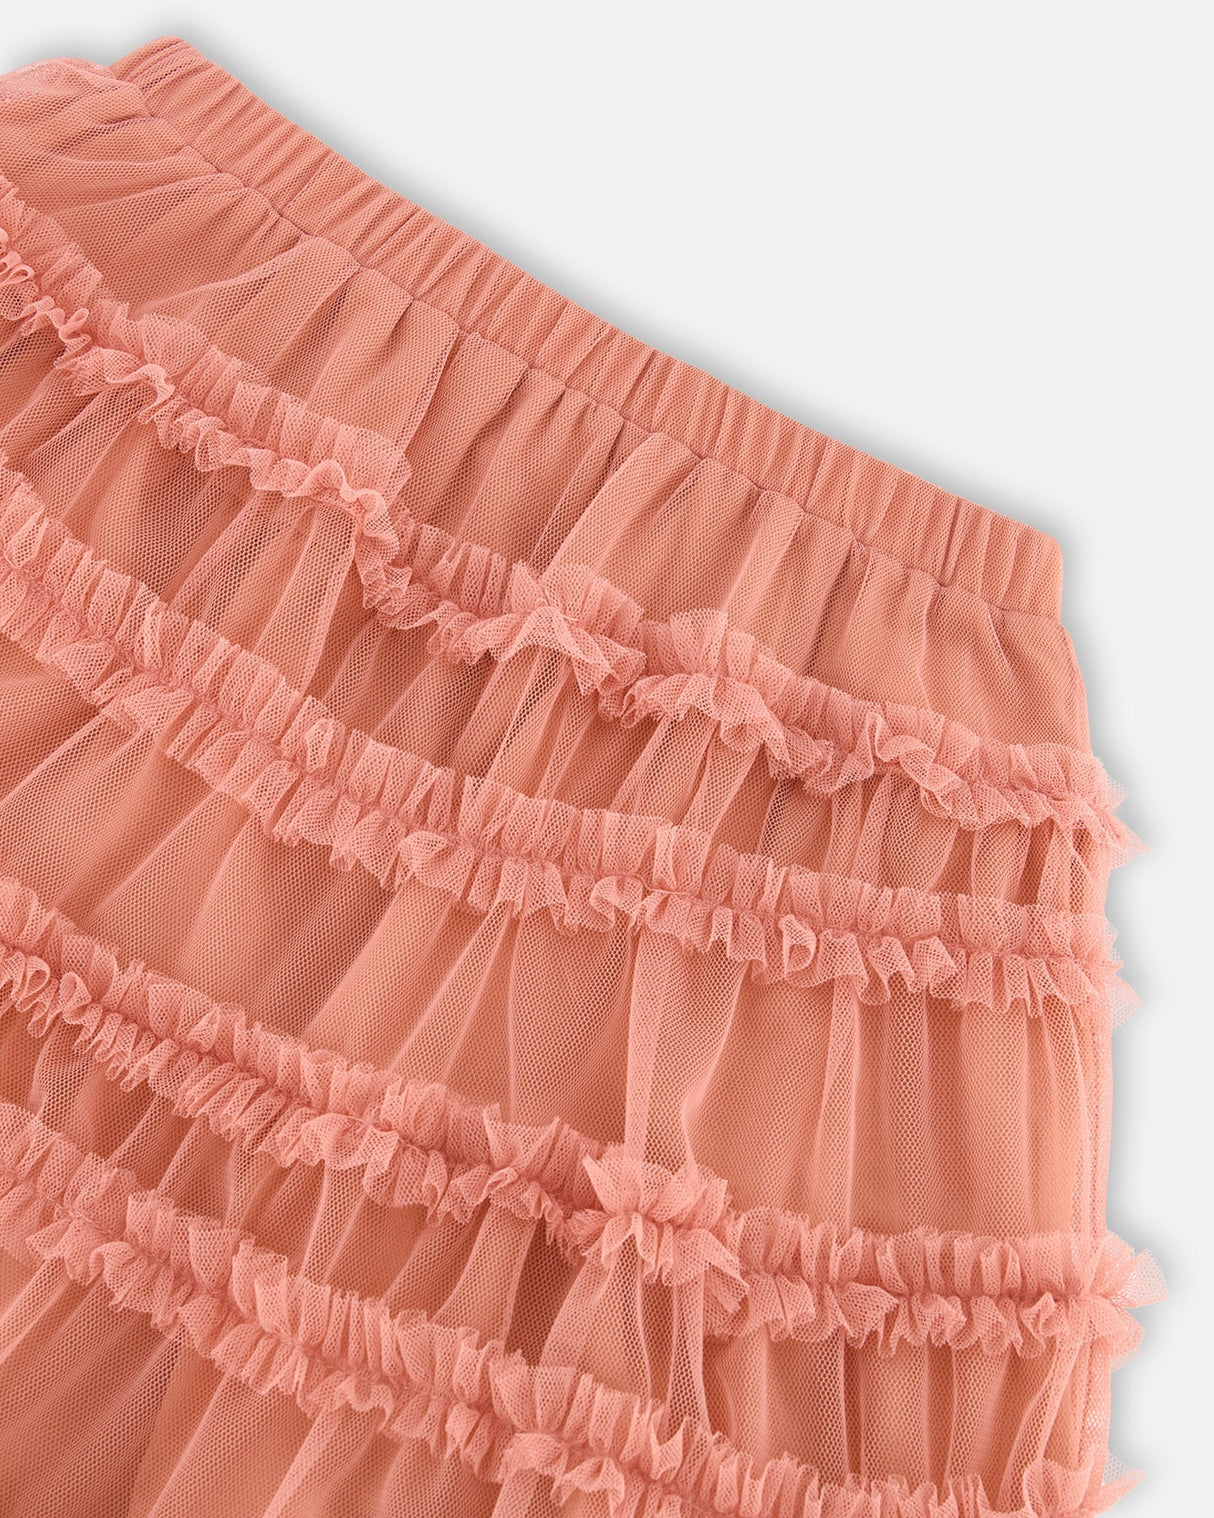 Below The Knee Mesh Skirt With Frills Salmon Pink-4